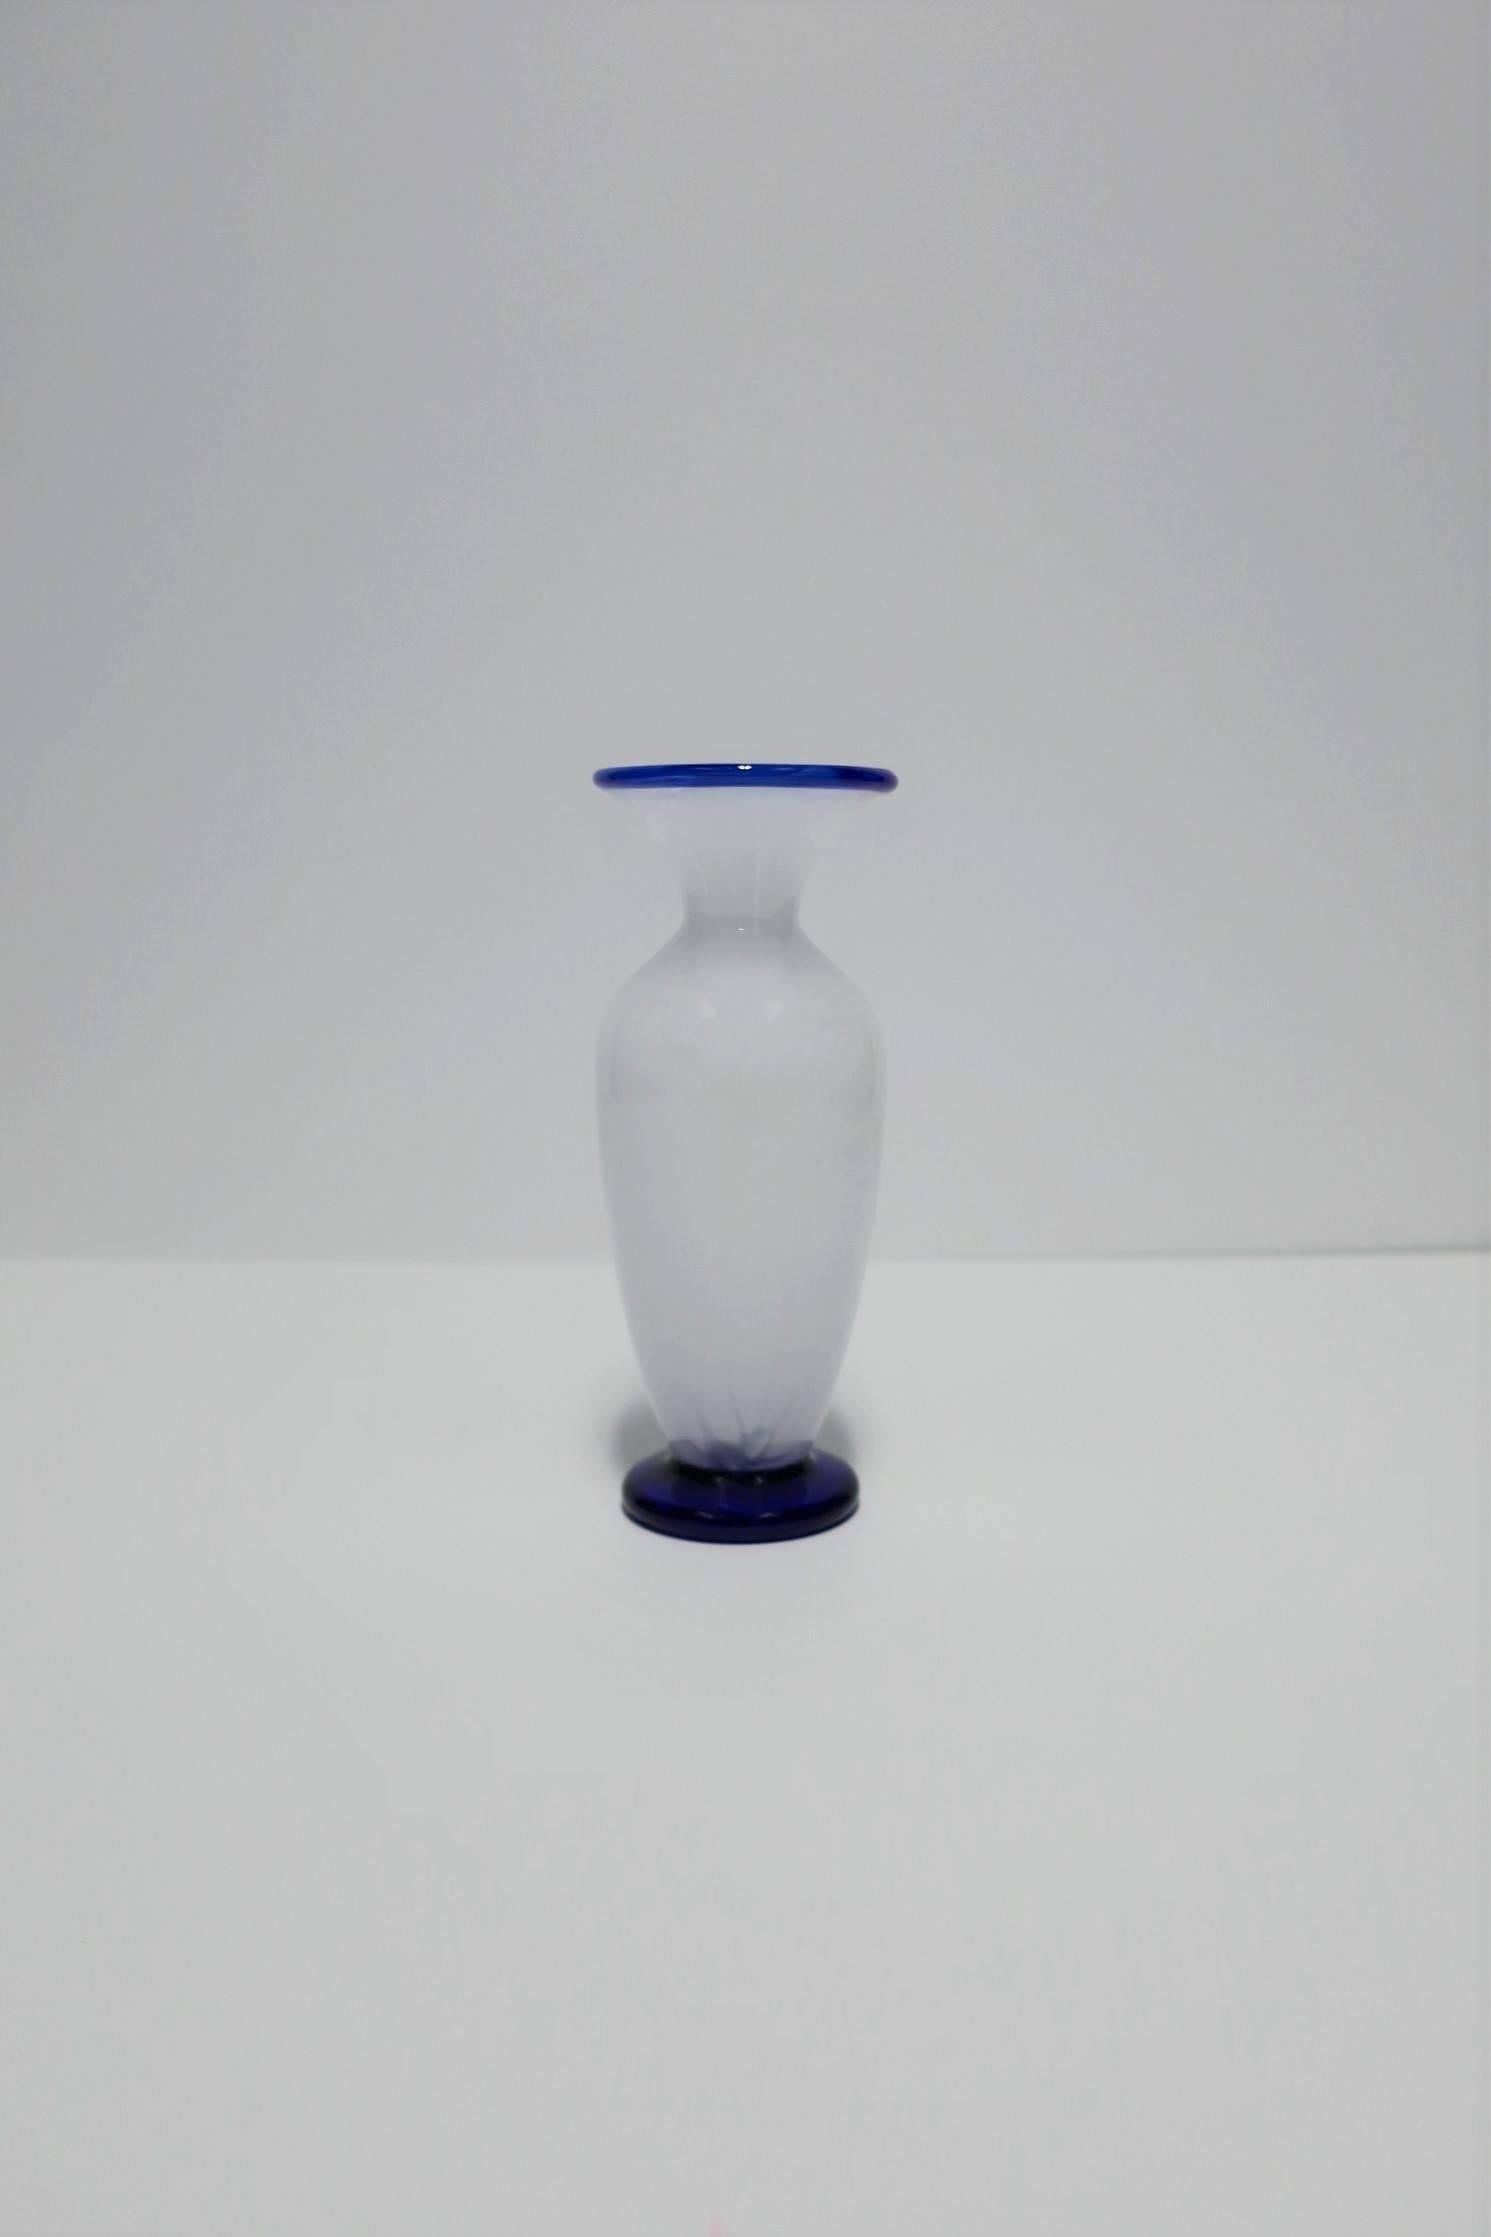 A beautiful and substantial Italian urn form blue and white art glass vase. Art glass is a beautiful combination of bright white and cobalt blue. Handblown as show from blowing tool mark on bottom (images #7 and #8.)

Vase measures: 2.25 in. D x 6.5